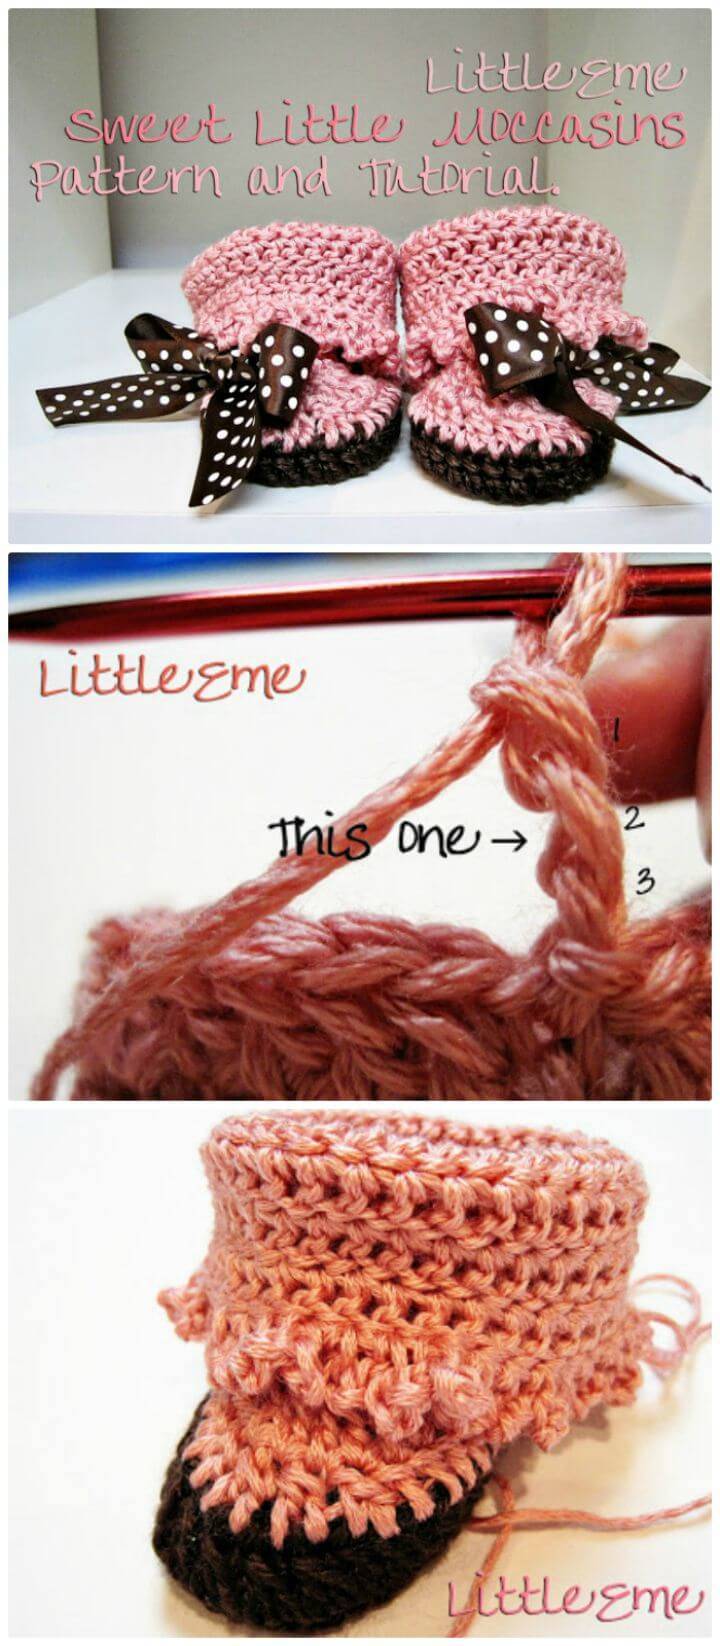 How To Make Sweet Little Baby Moccasins Free Crochet Pattern And Tutorial